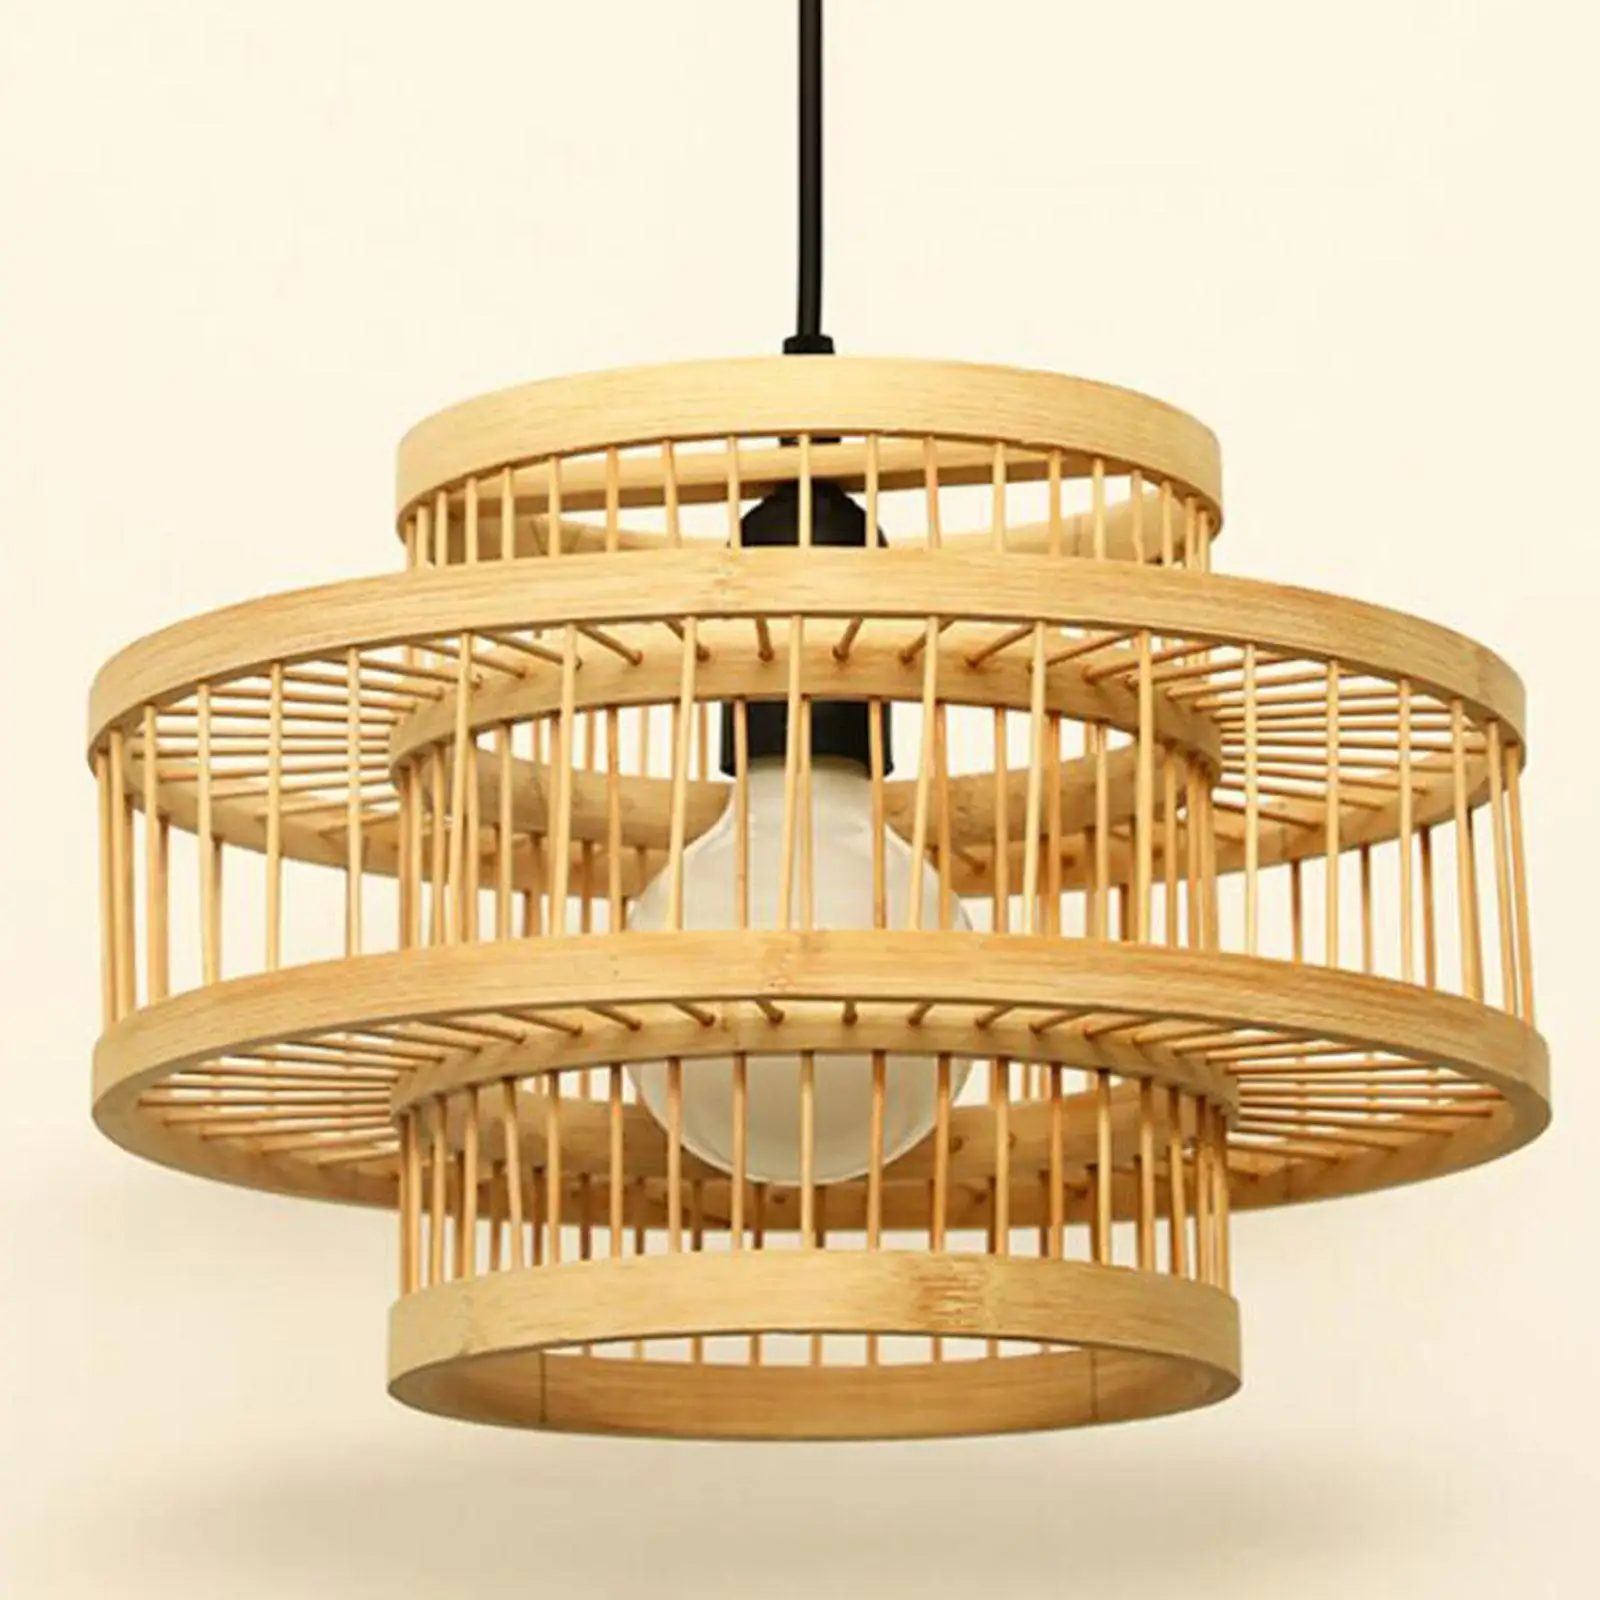 Woven Bamboo Lamp Shade Pendant Light Cover Vintage Style Chandelier Lampshade for Hotel Restaurant Living Room Decoration